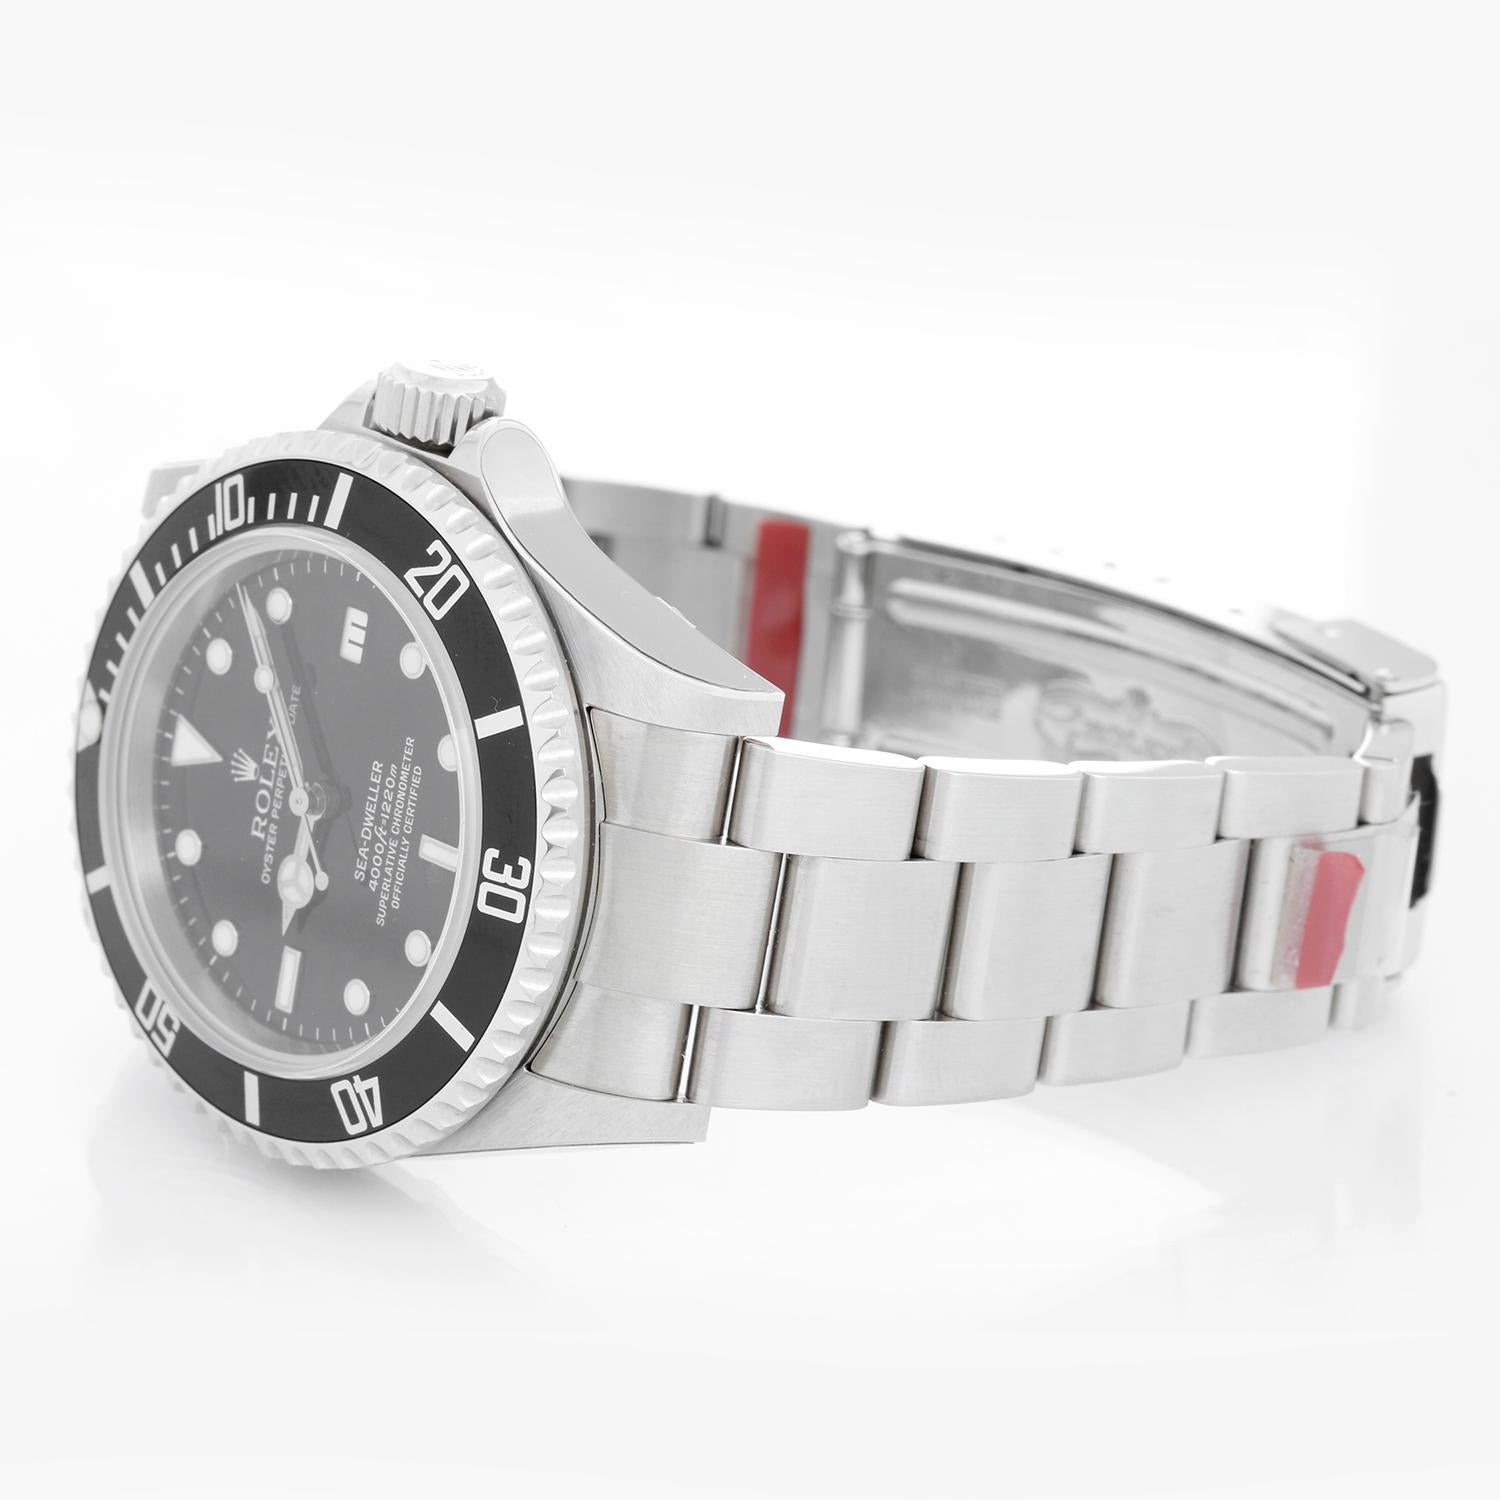 New Old Stock Rolex Sea Dweller Stainless Steel Men's Divers Watch 16600 - Automatic winding, 31 jewels, Quickset, sapphire crystal. Stainless steel case with rotating bezel and helium escape valve (40mm diameter). Black dial with luminous markers.